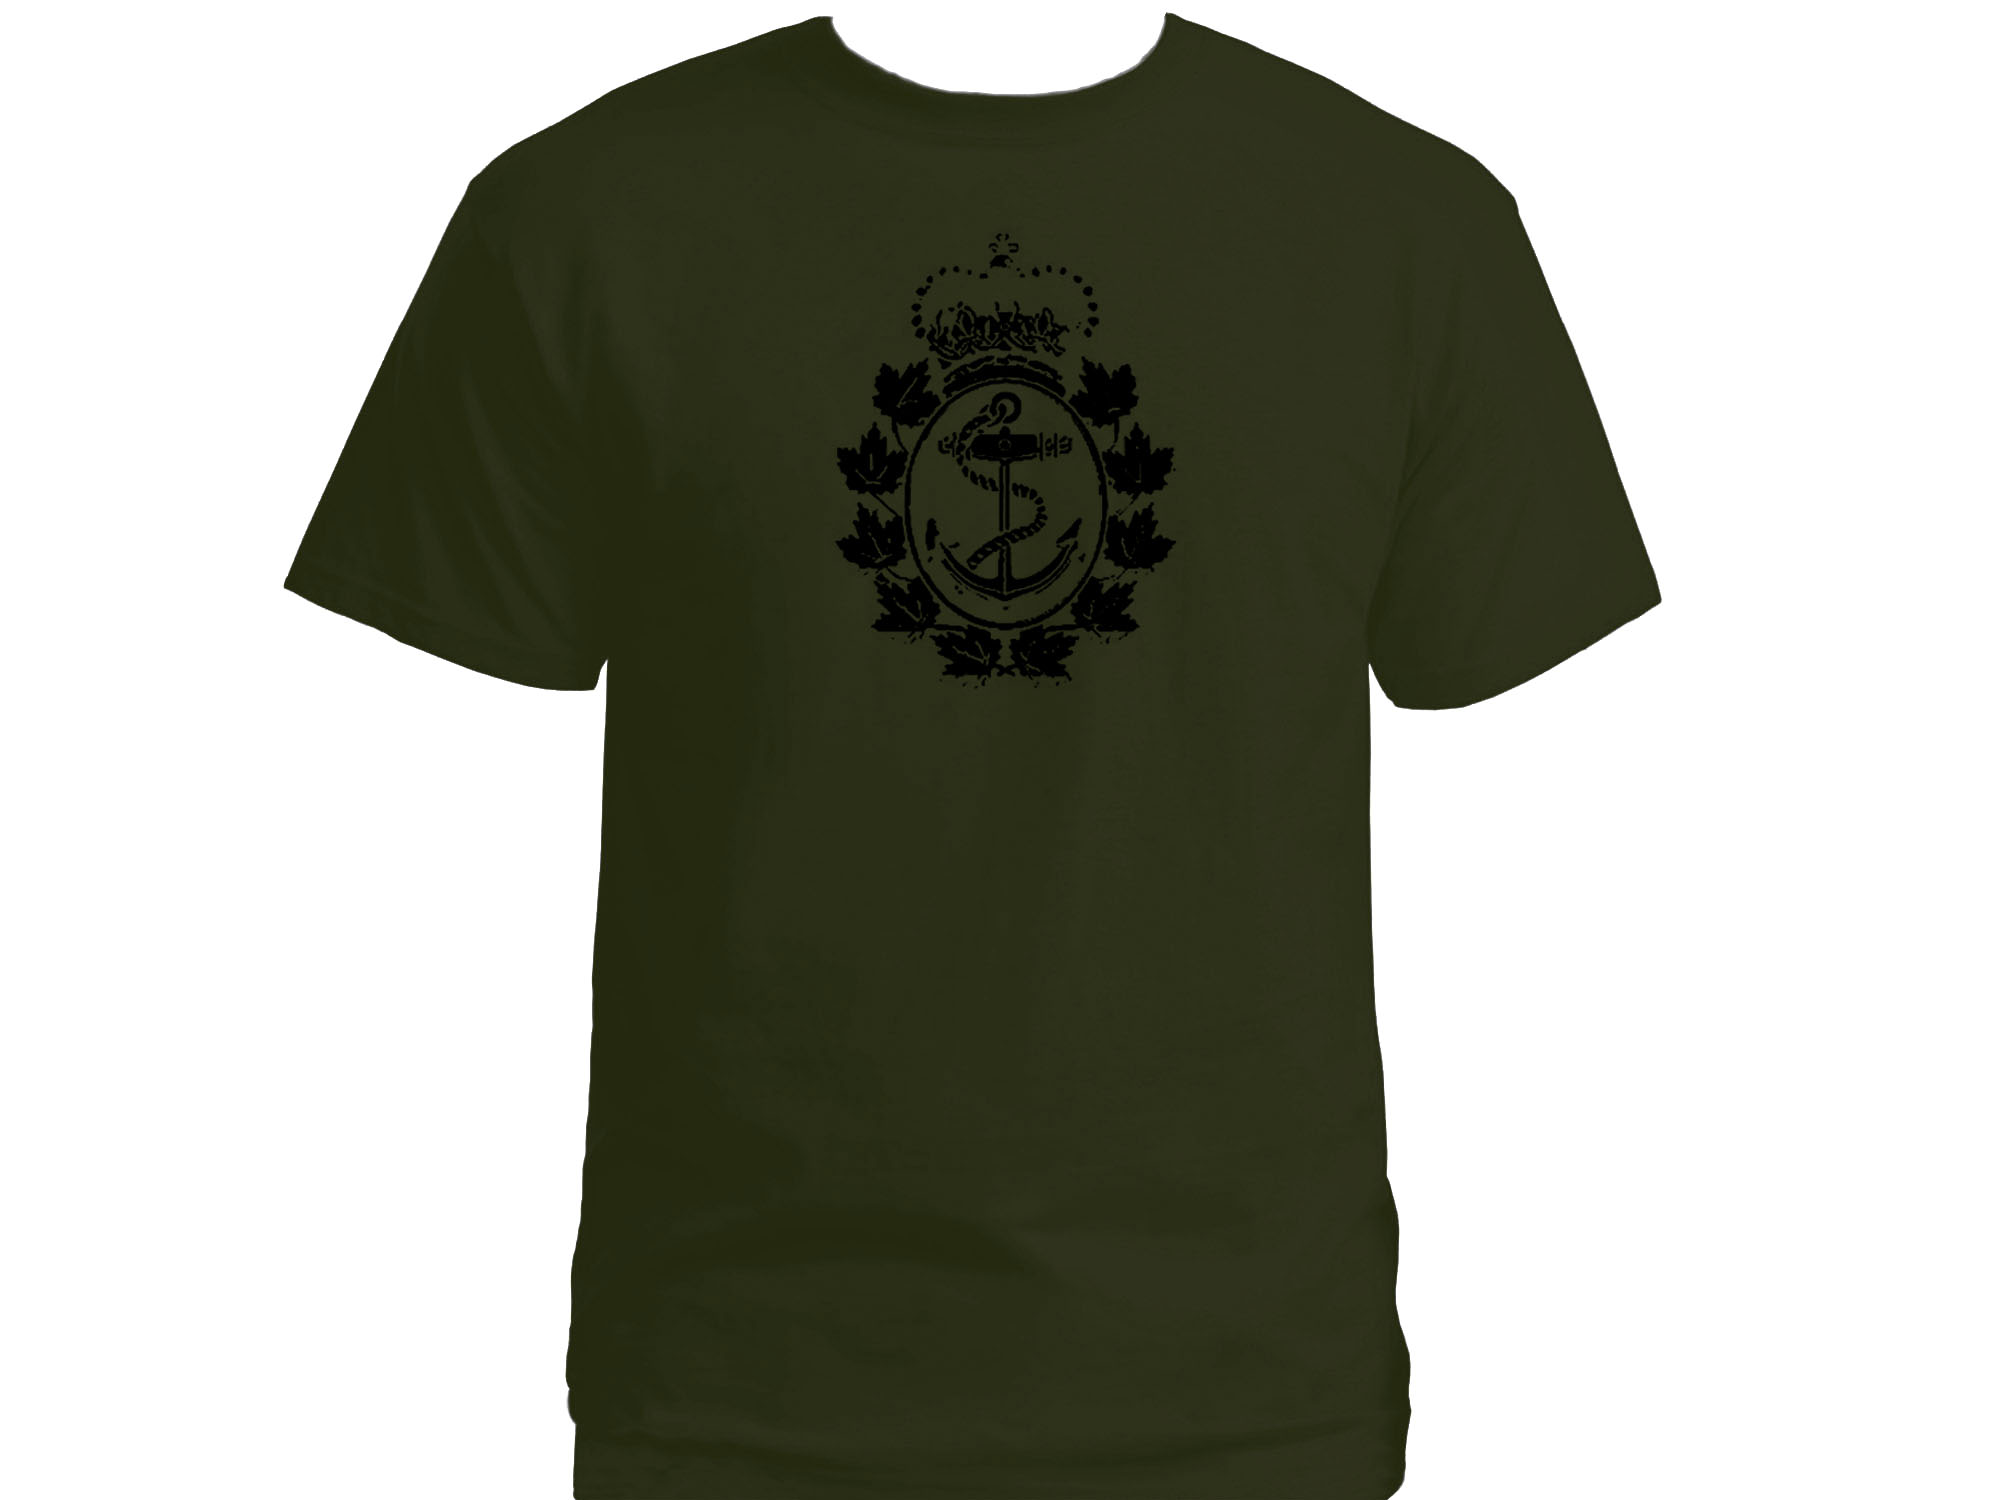 Canadian navy forces army green t-shirt